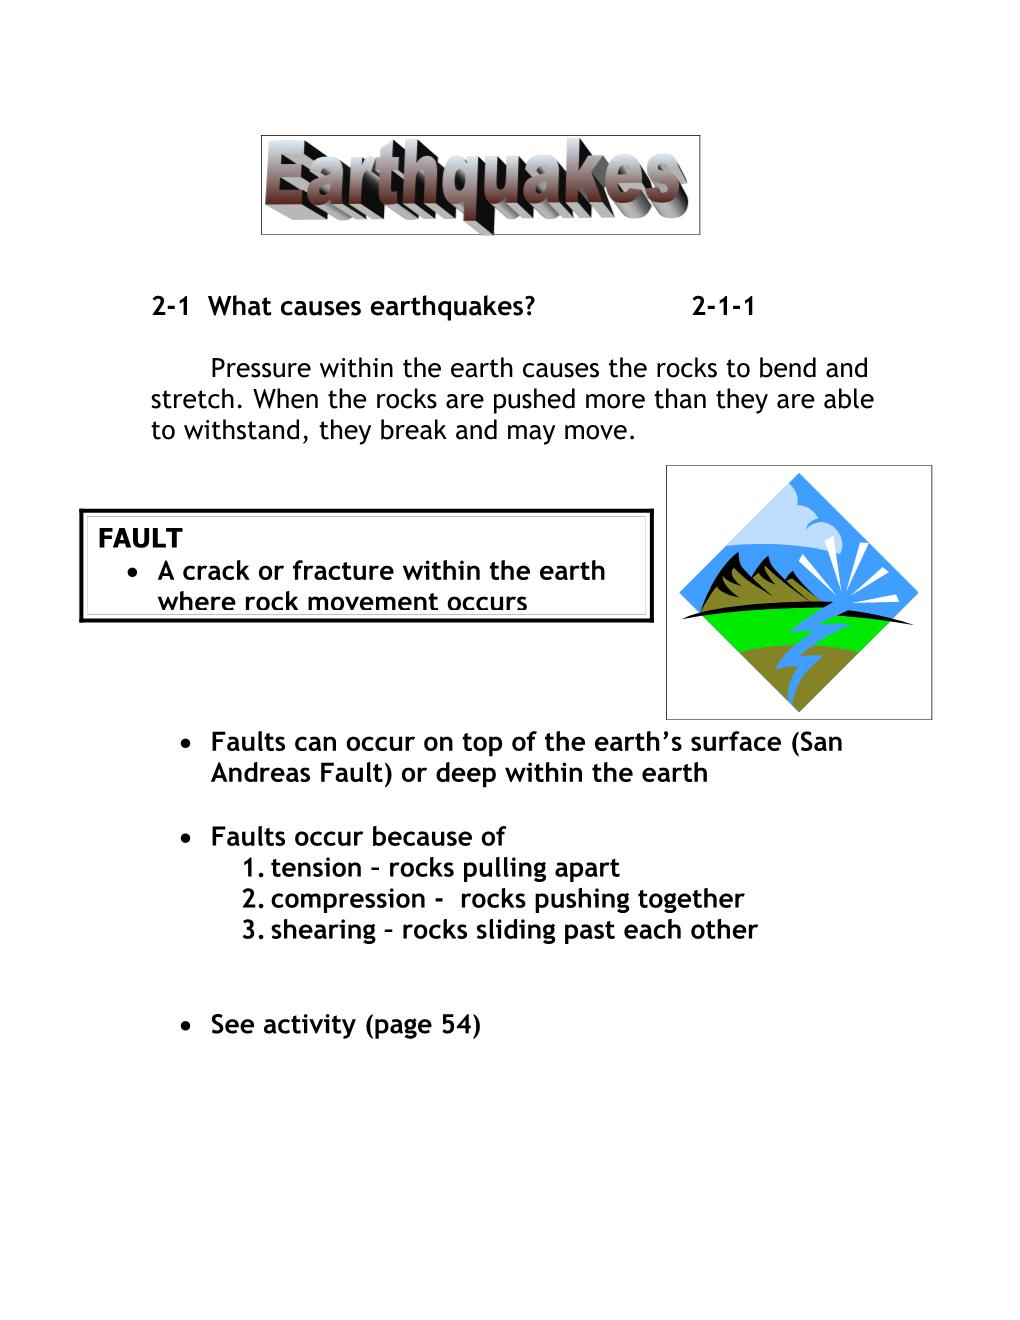 2-1 What Causes Earthquakes?2-1-1